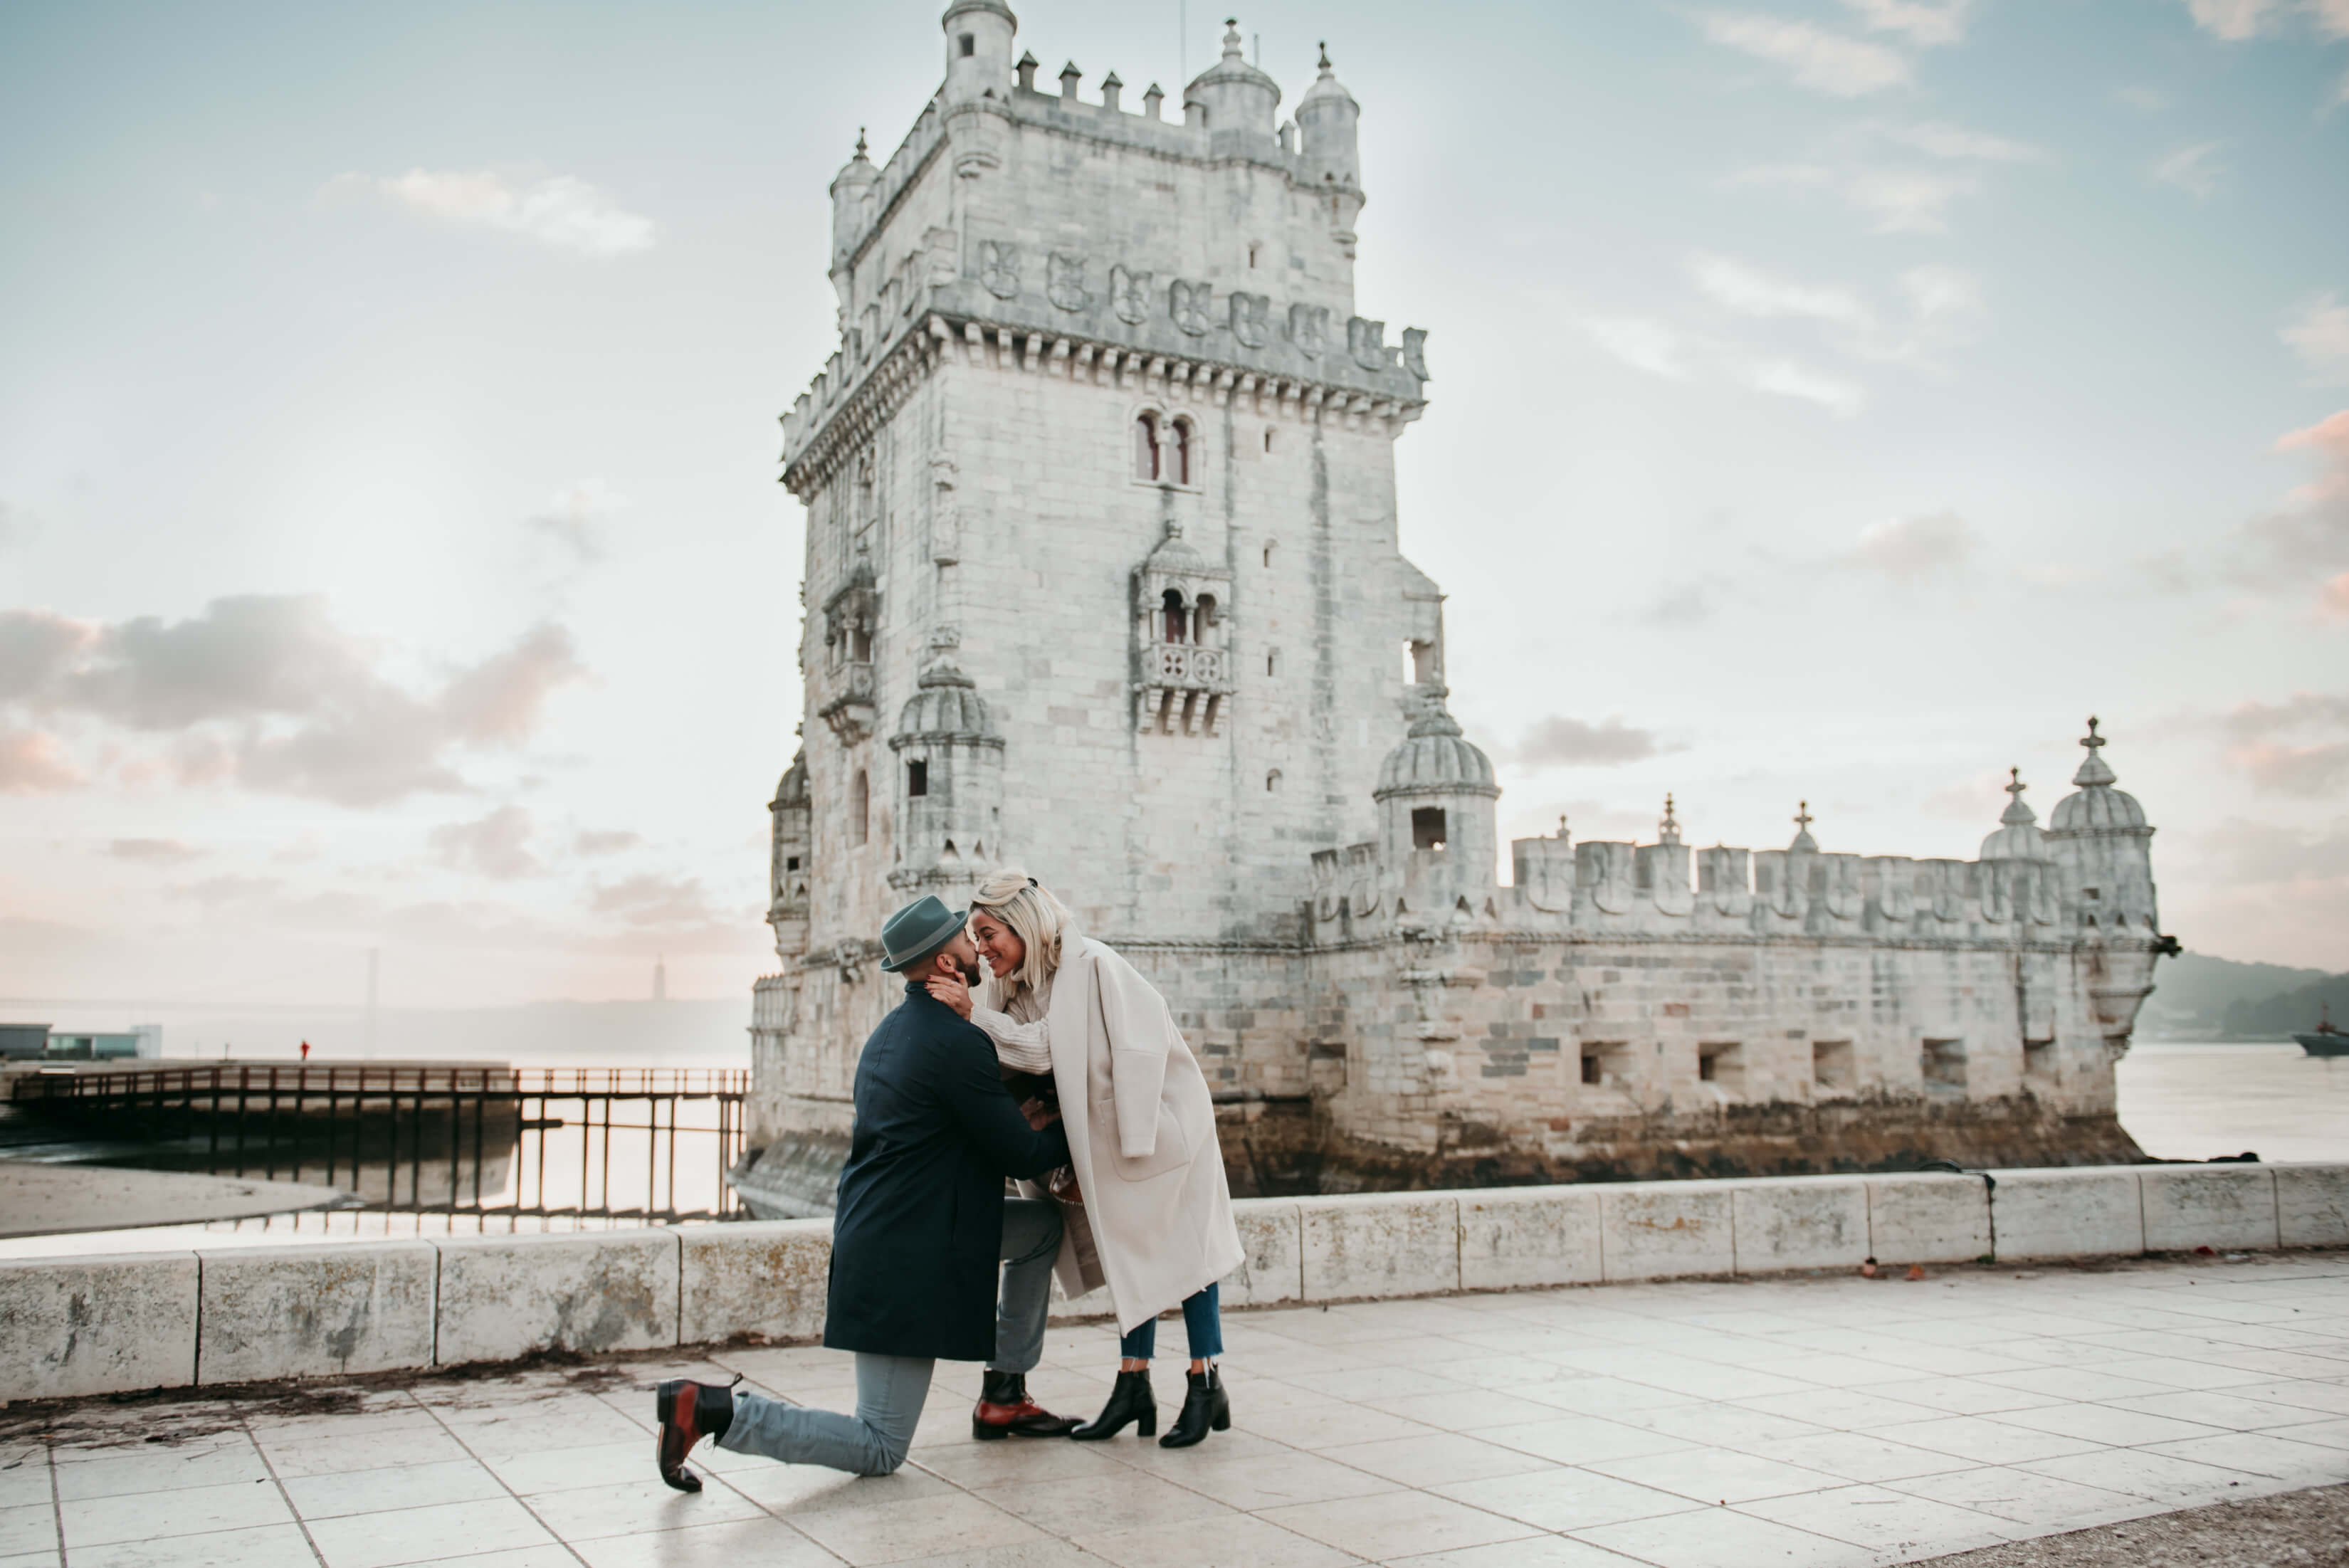 A couple mid-proposal in front of a tower in Lisbon